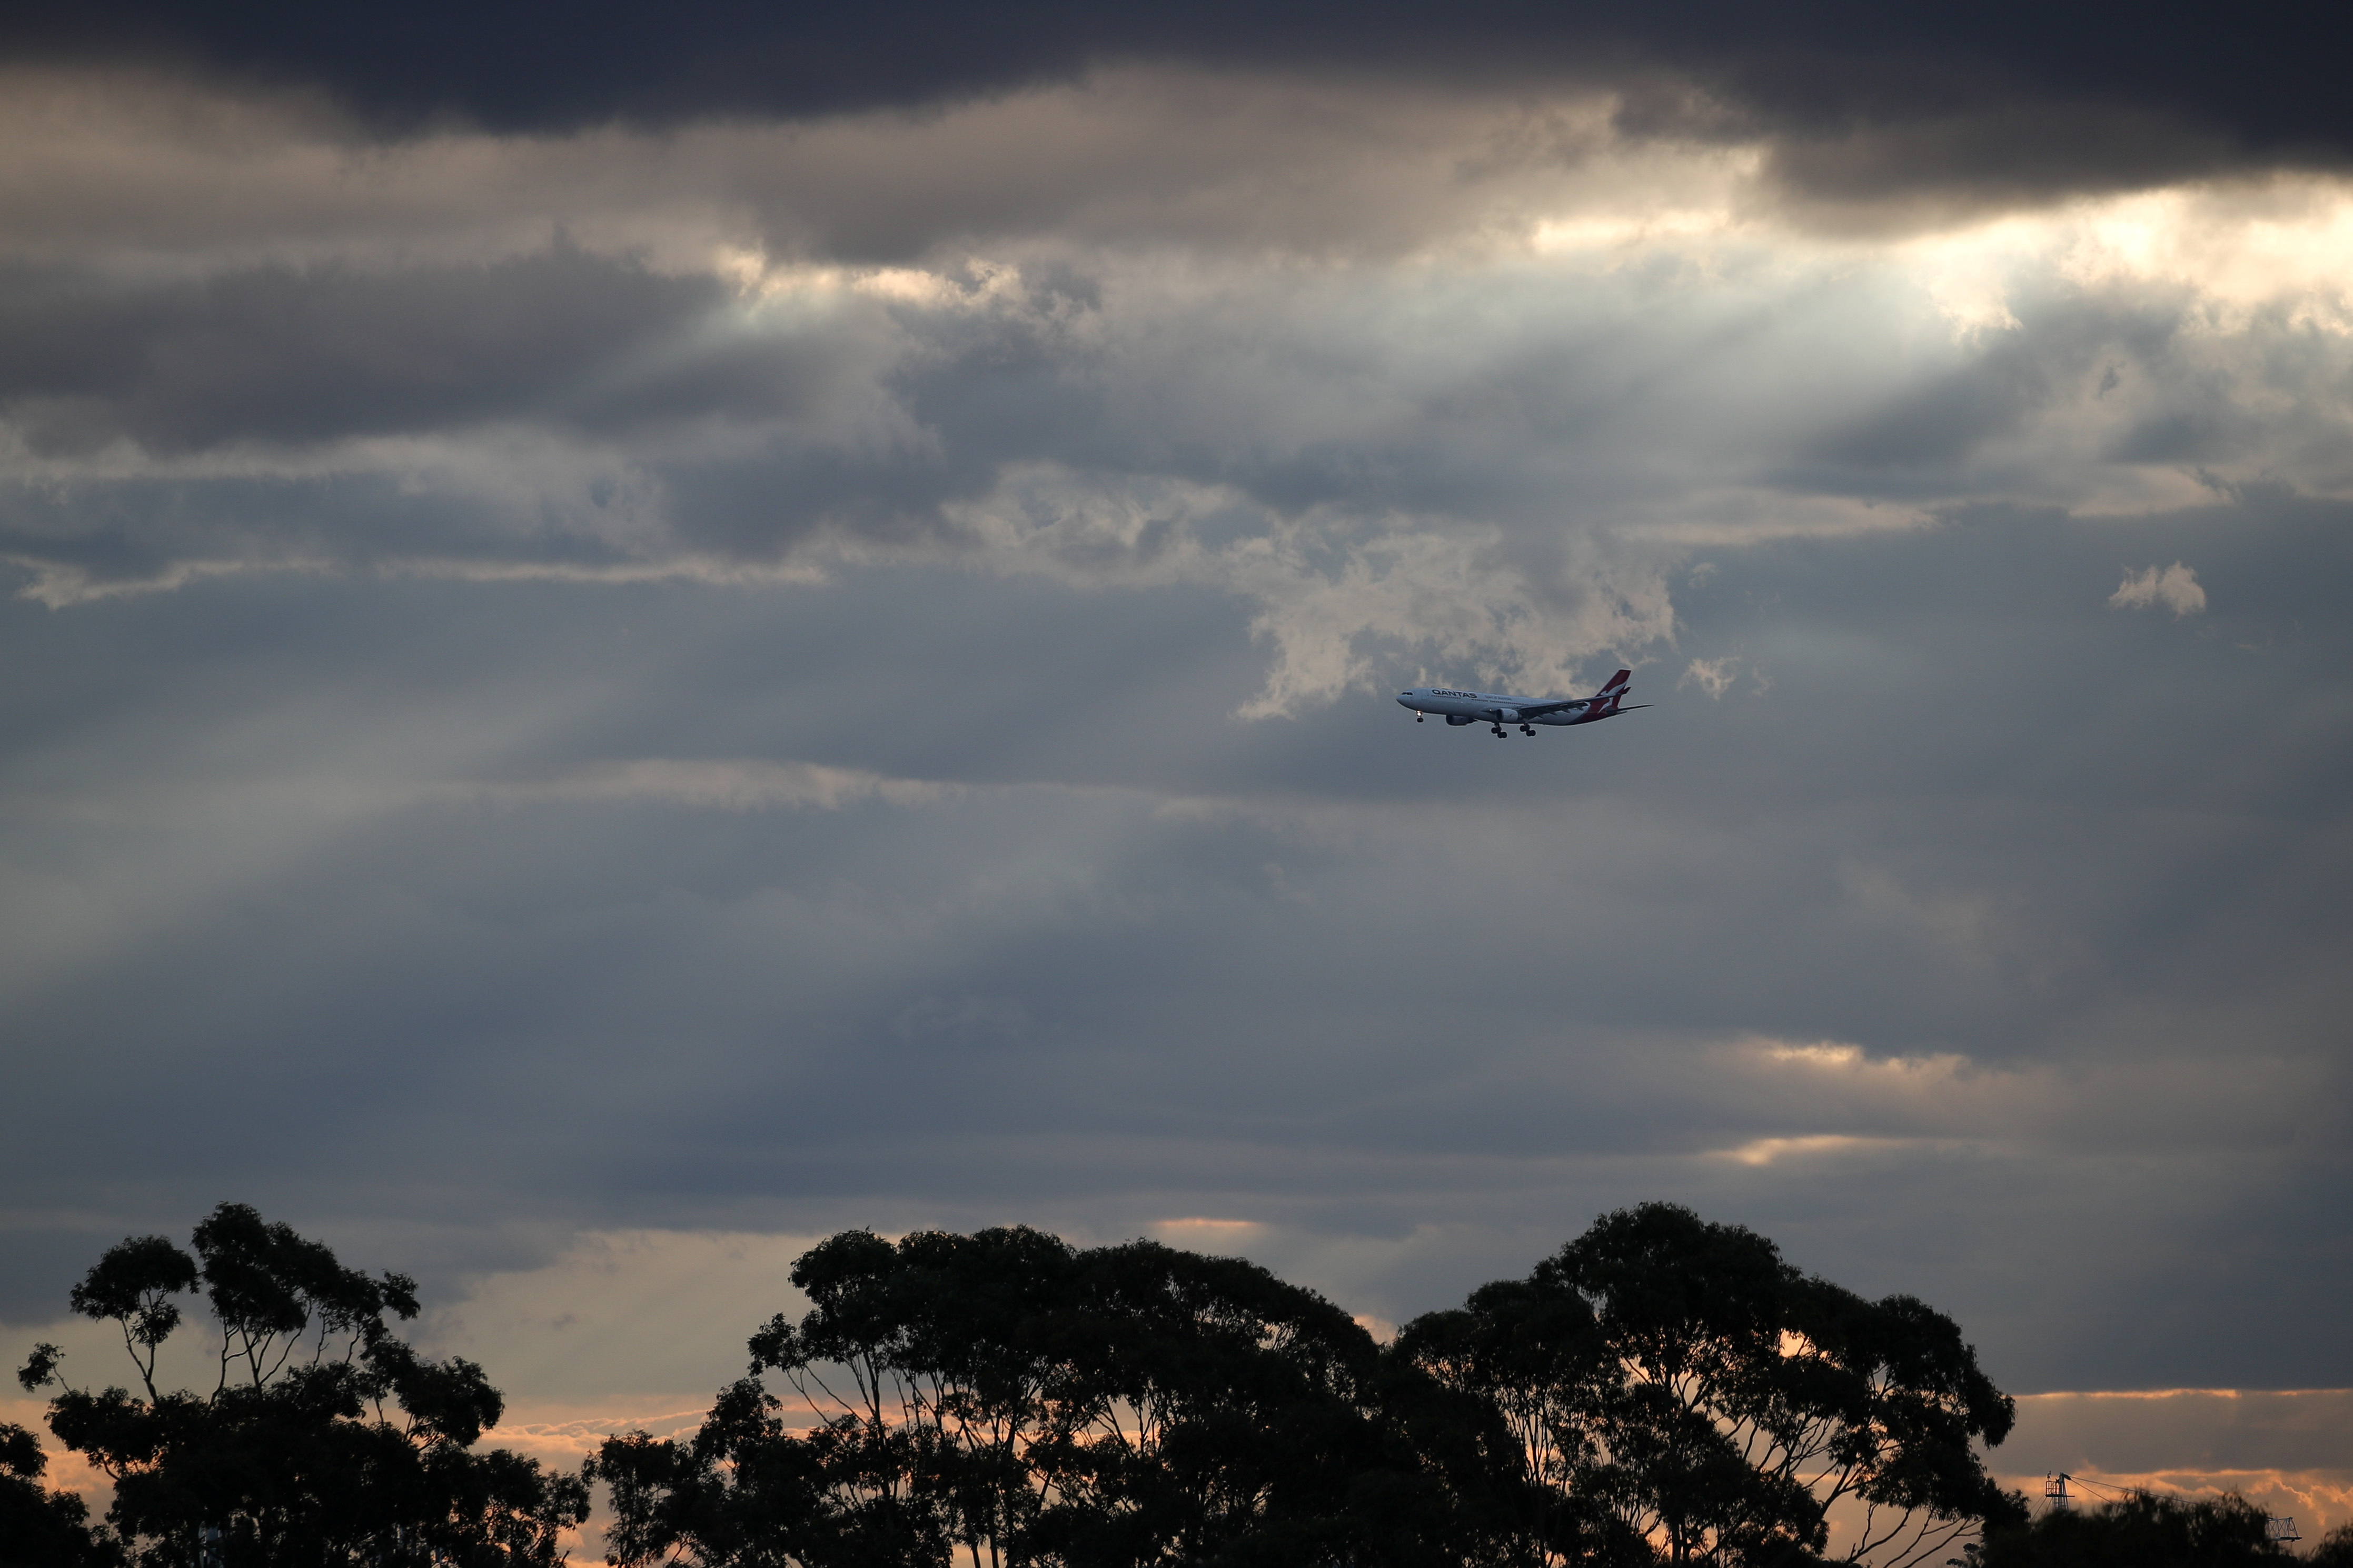 A Qantas plane approaches Kingsford Smith International Airport in Sydney